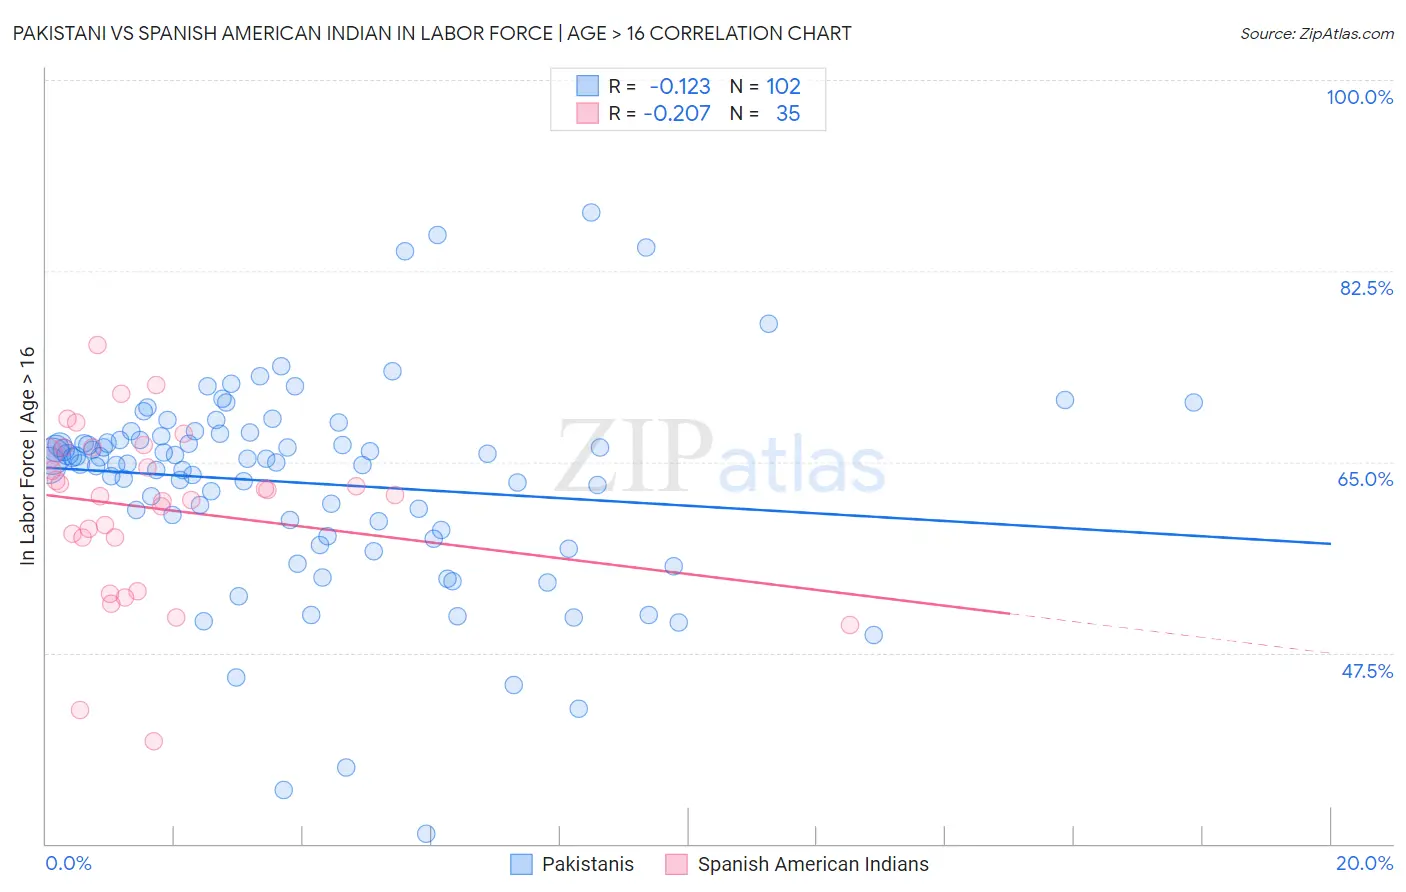 Pakistani vs Spanish American Indian In Labor Force | Age > 16